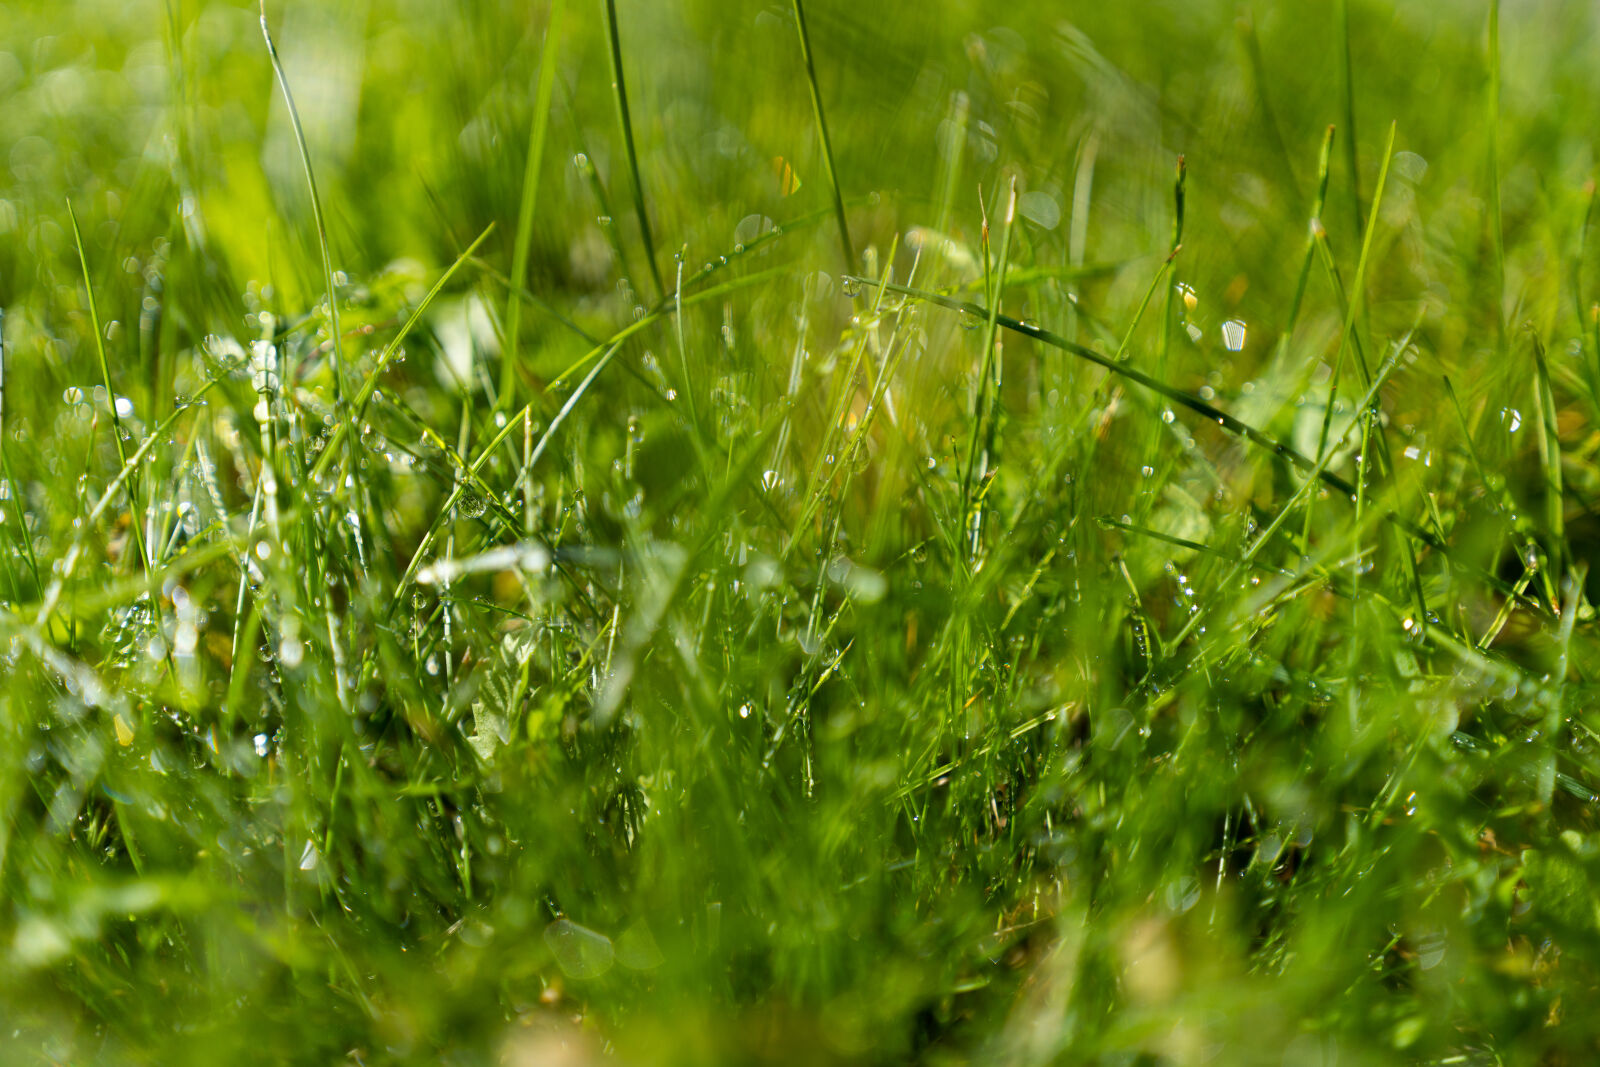 Sony a7R IV sample photo. After the rain grass photography